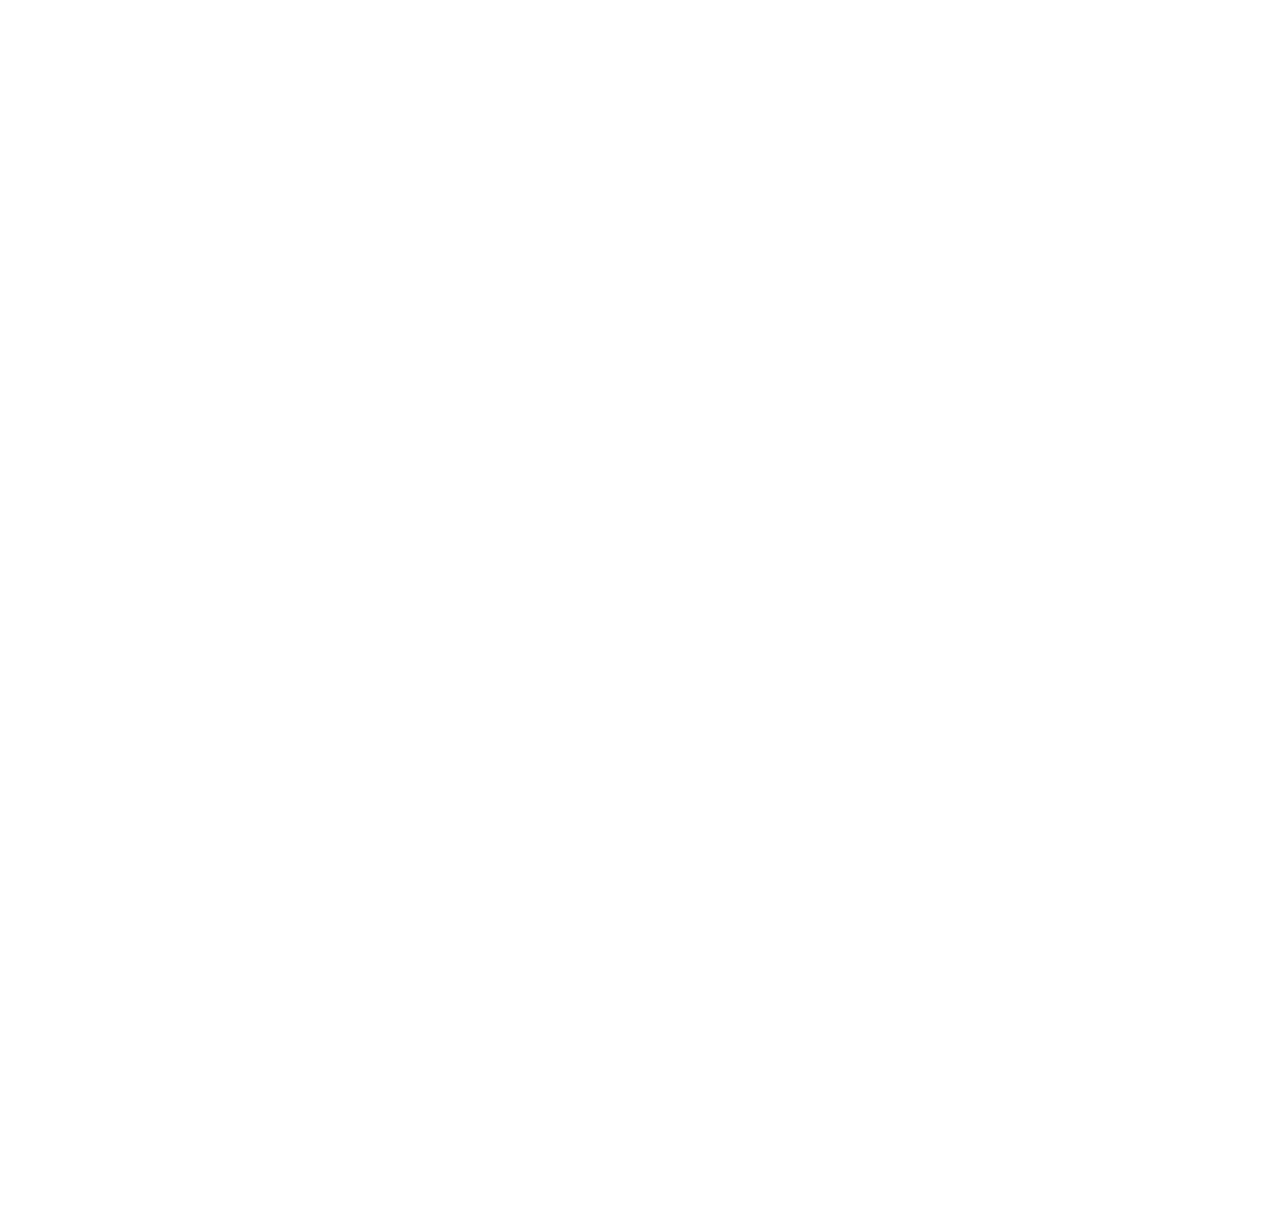 King of Clubs's logo